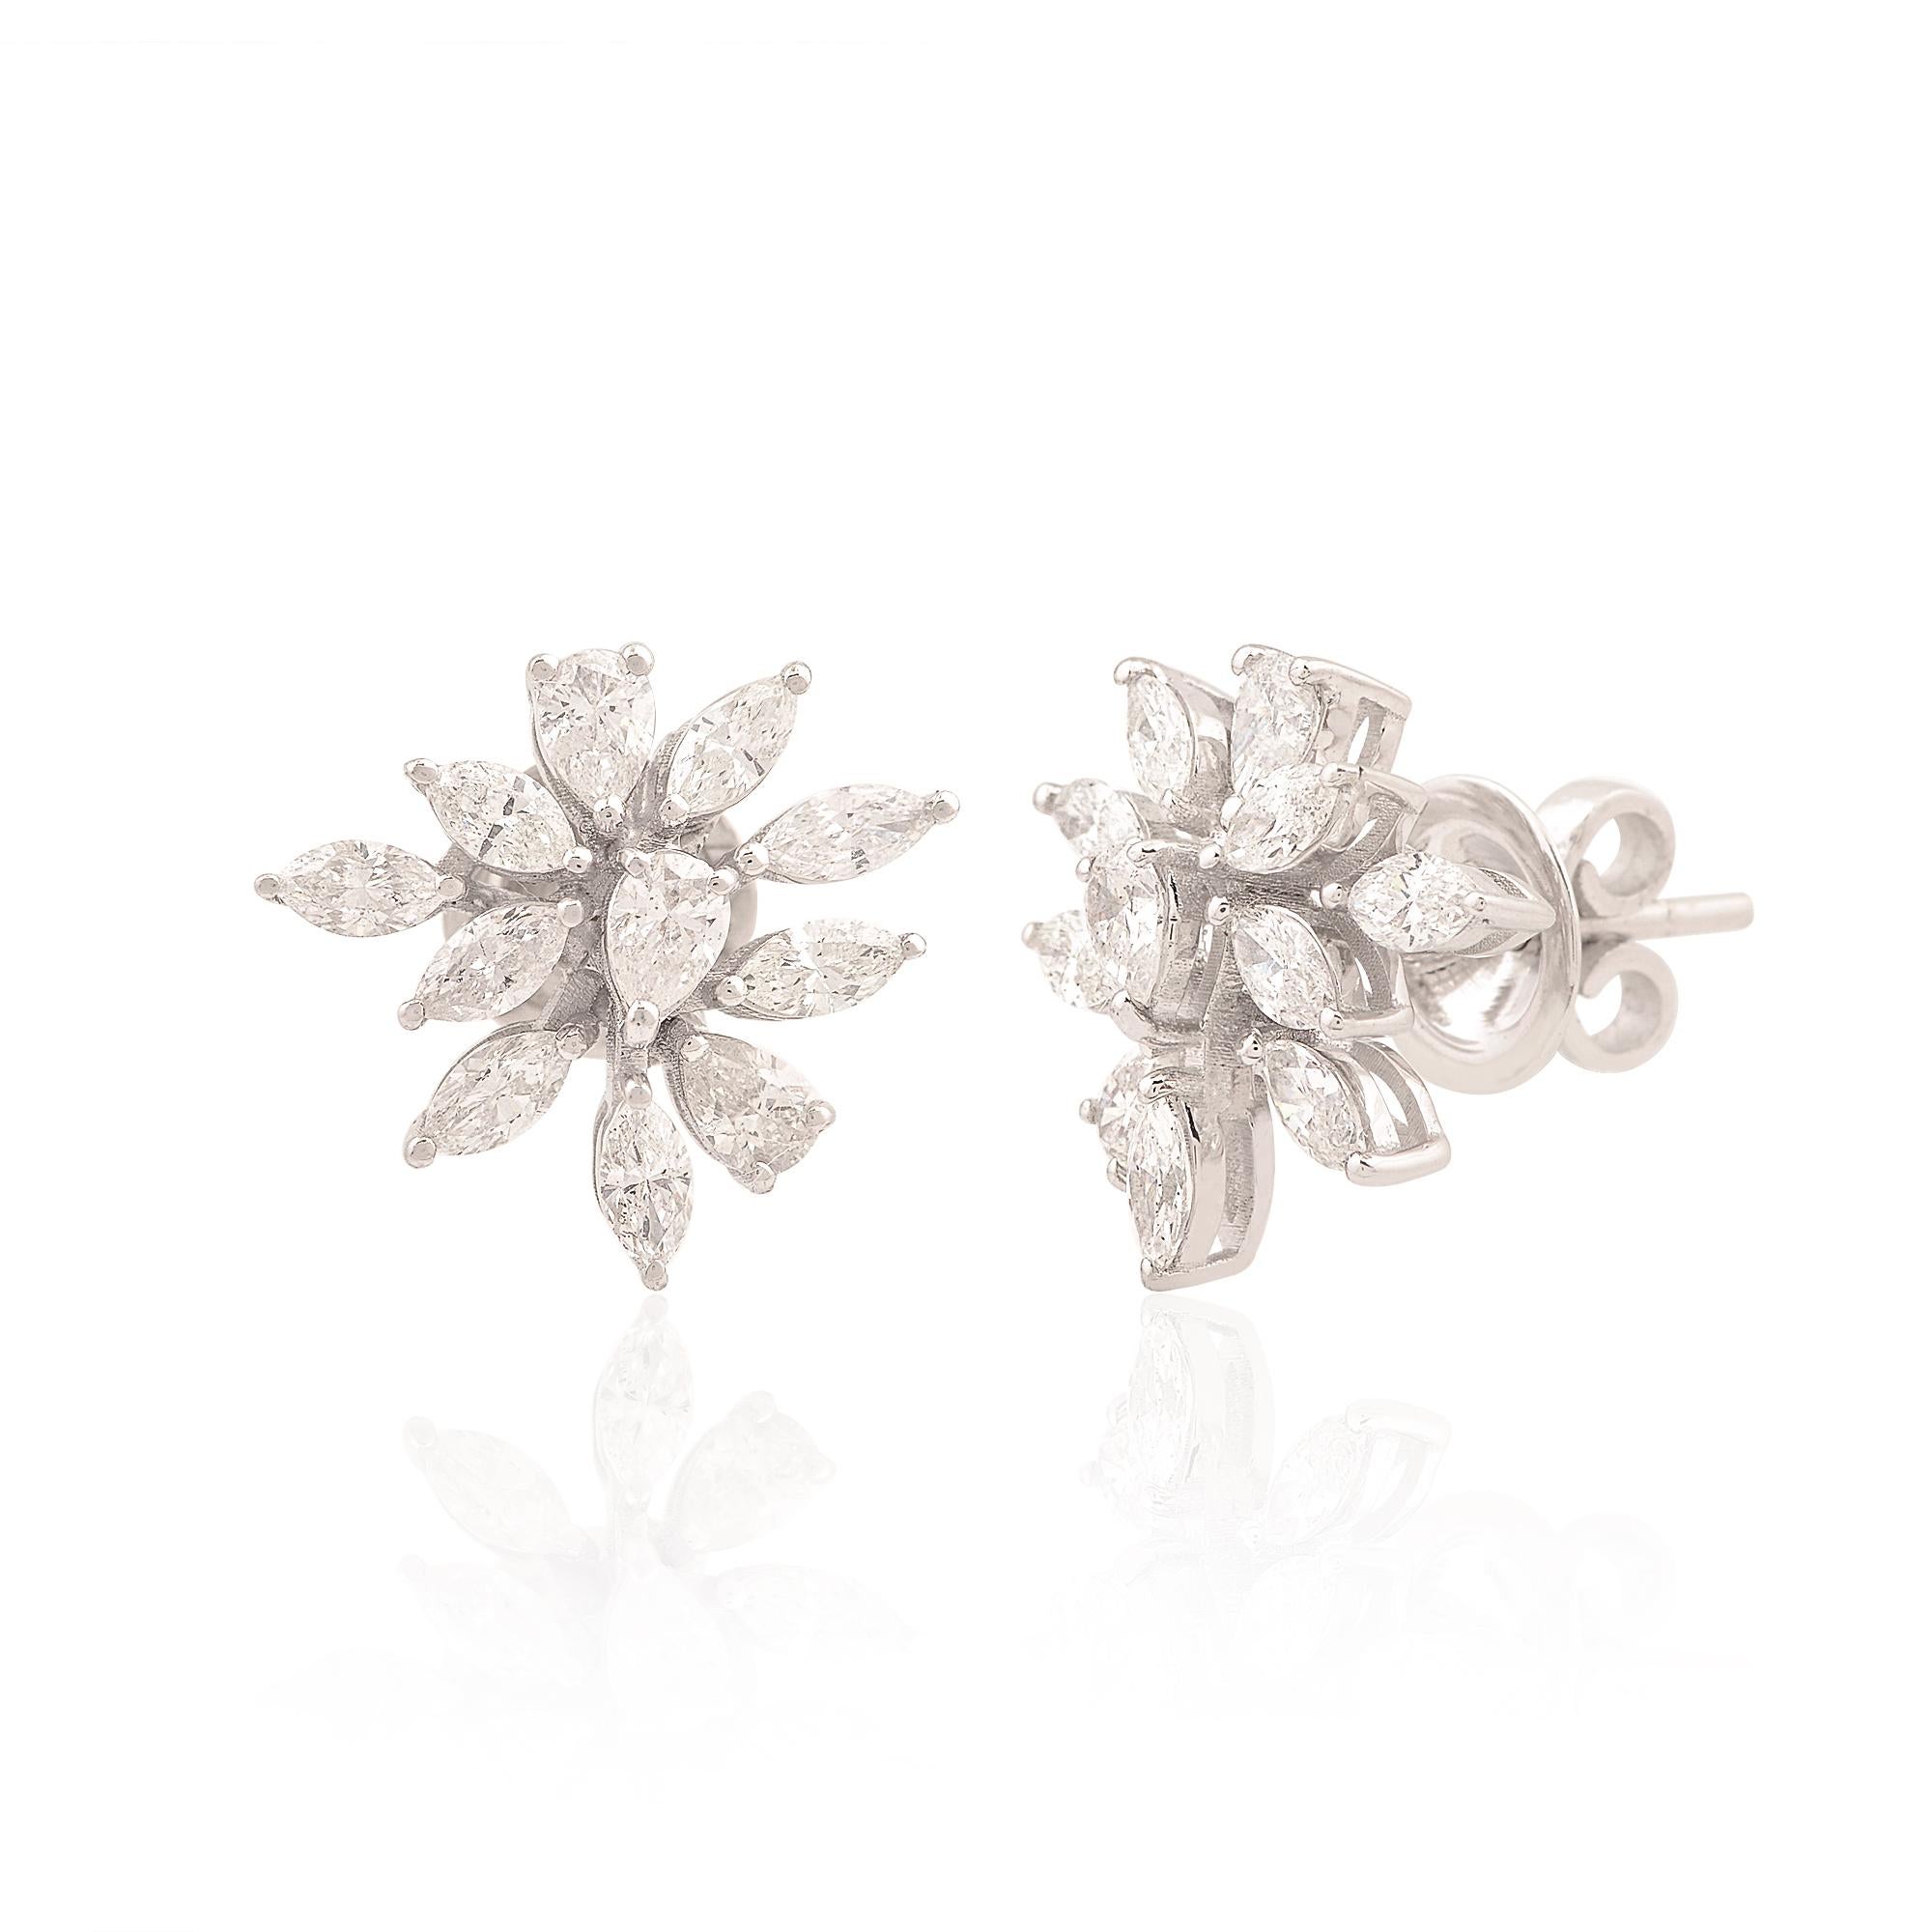 At the heart of each earring lies a magnificent marquise-cut diamond, meticulously selected for its exceptional clarity, brilliance, and fire. With a combined weight of 1.69 carats, these diamonds radiate with a mesmerizing allure, captivating all